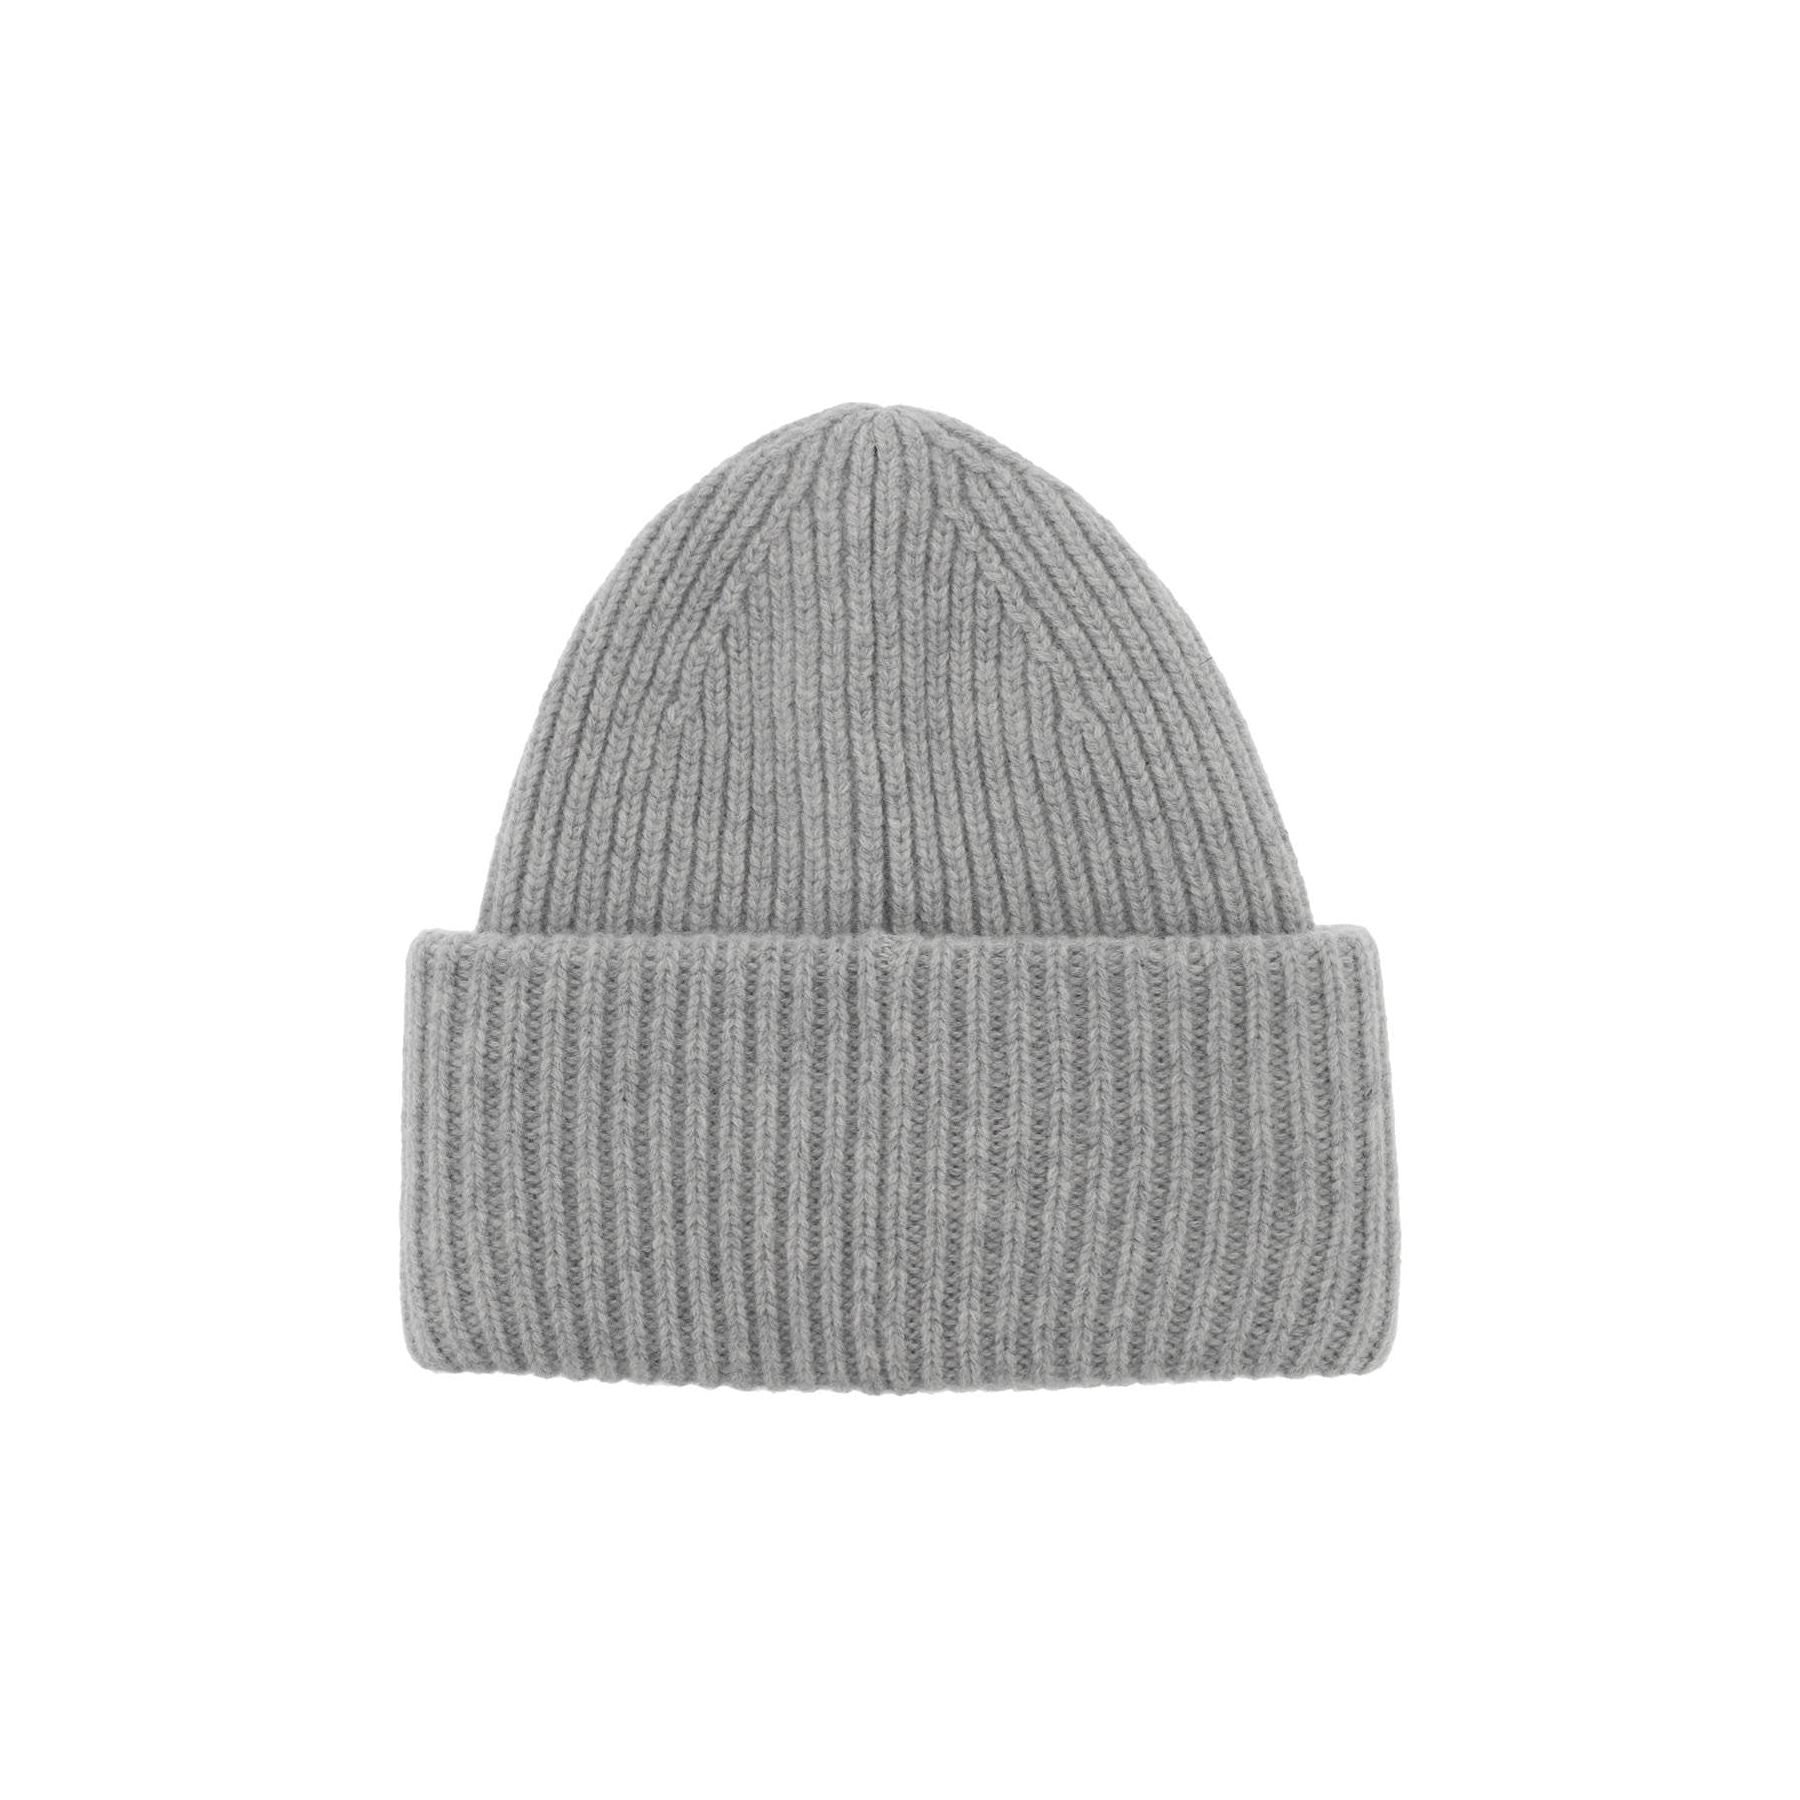 Large Face Patch Wool Knit Beanie Hat